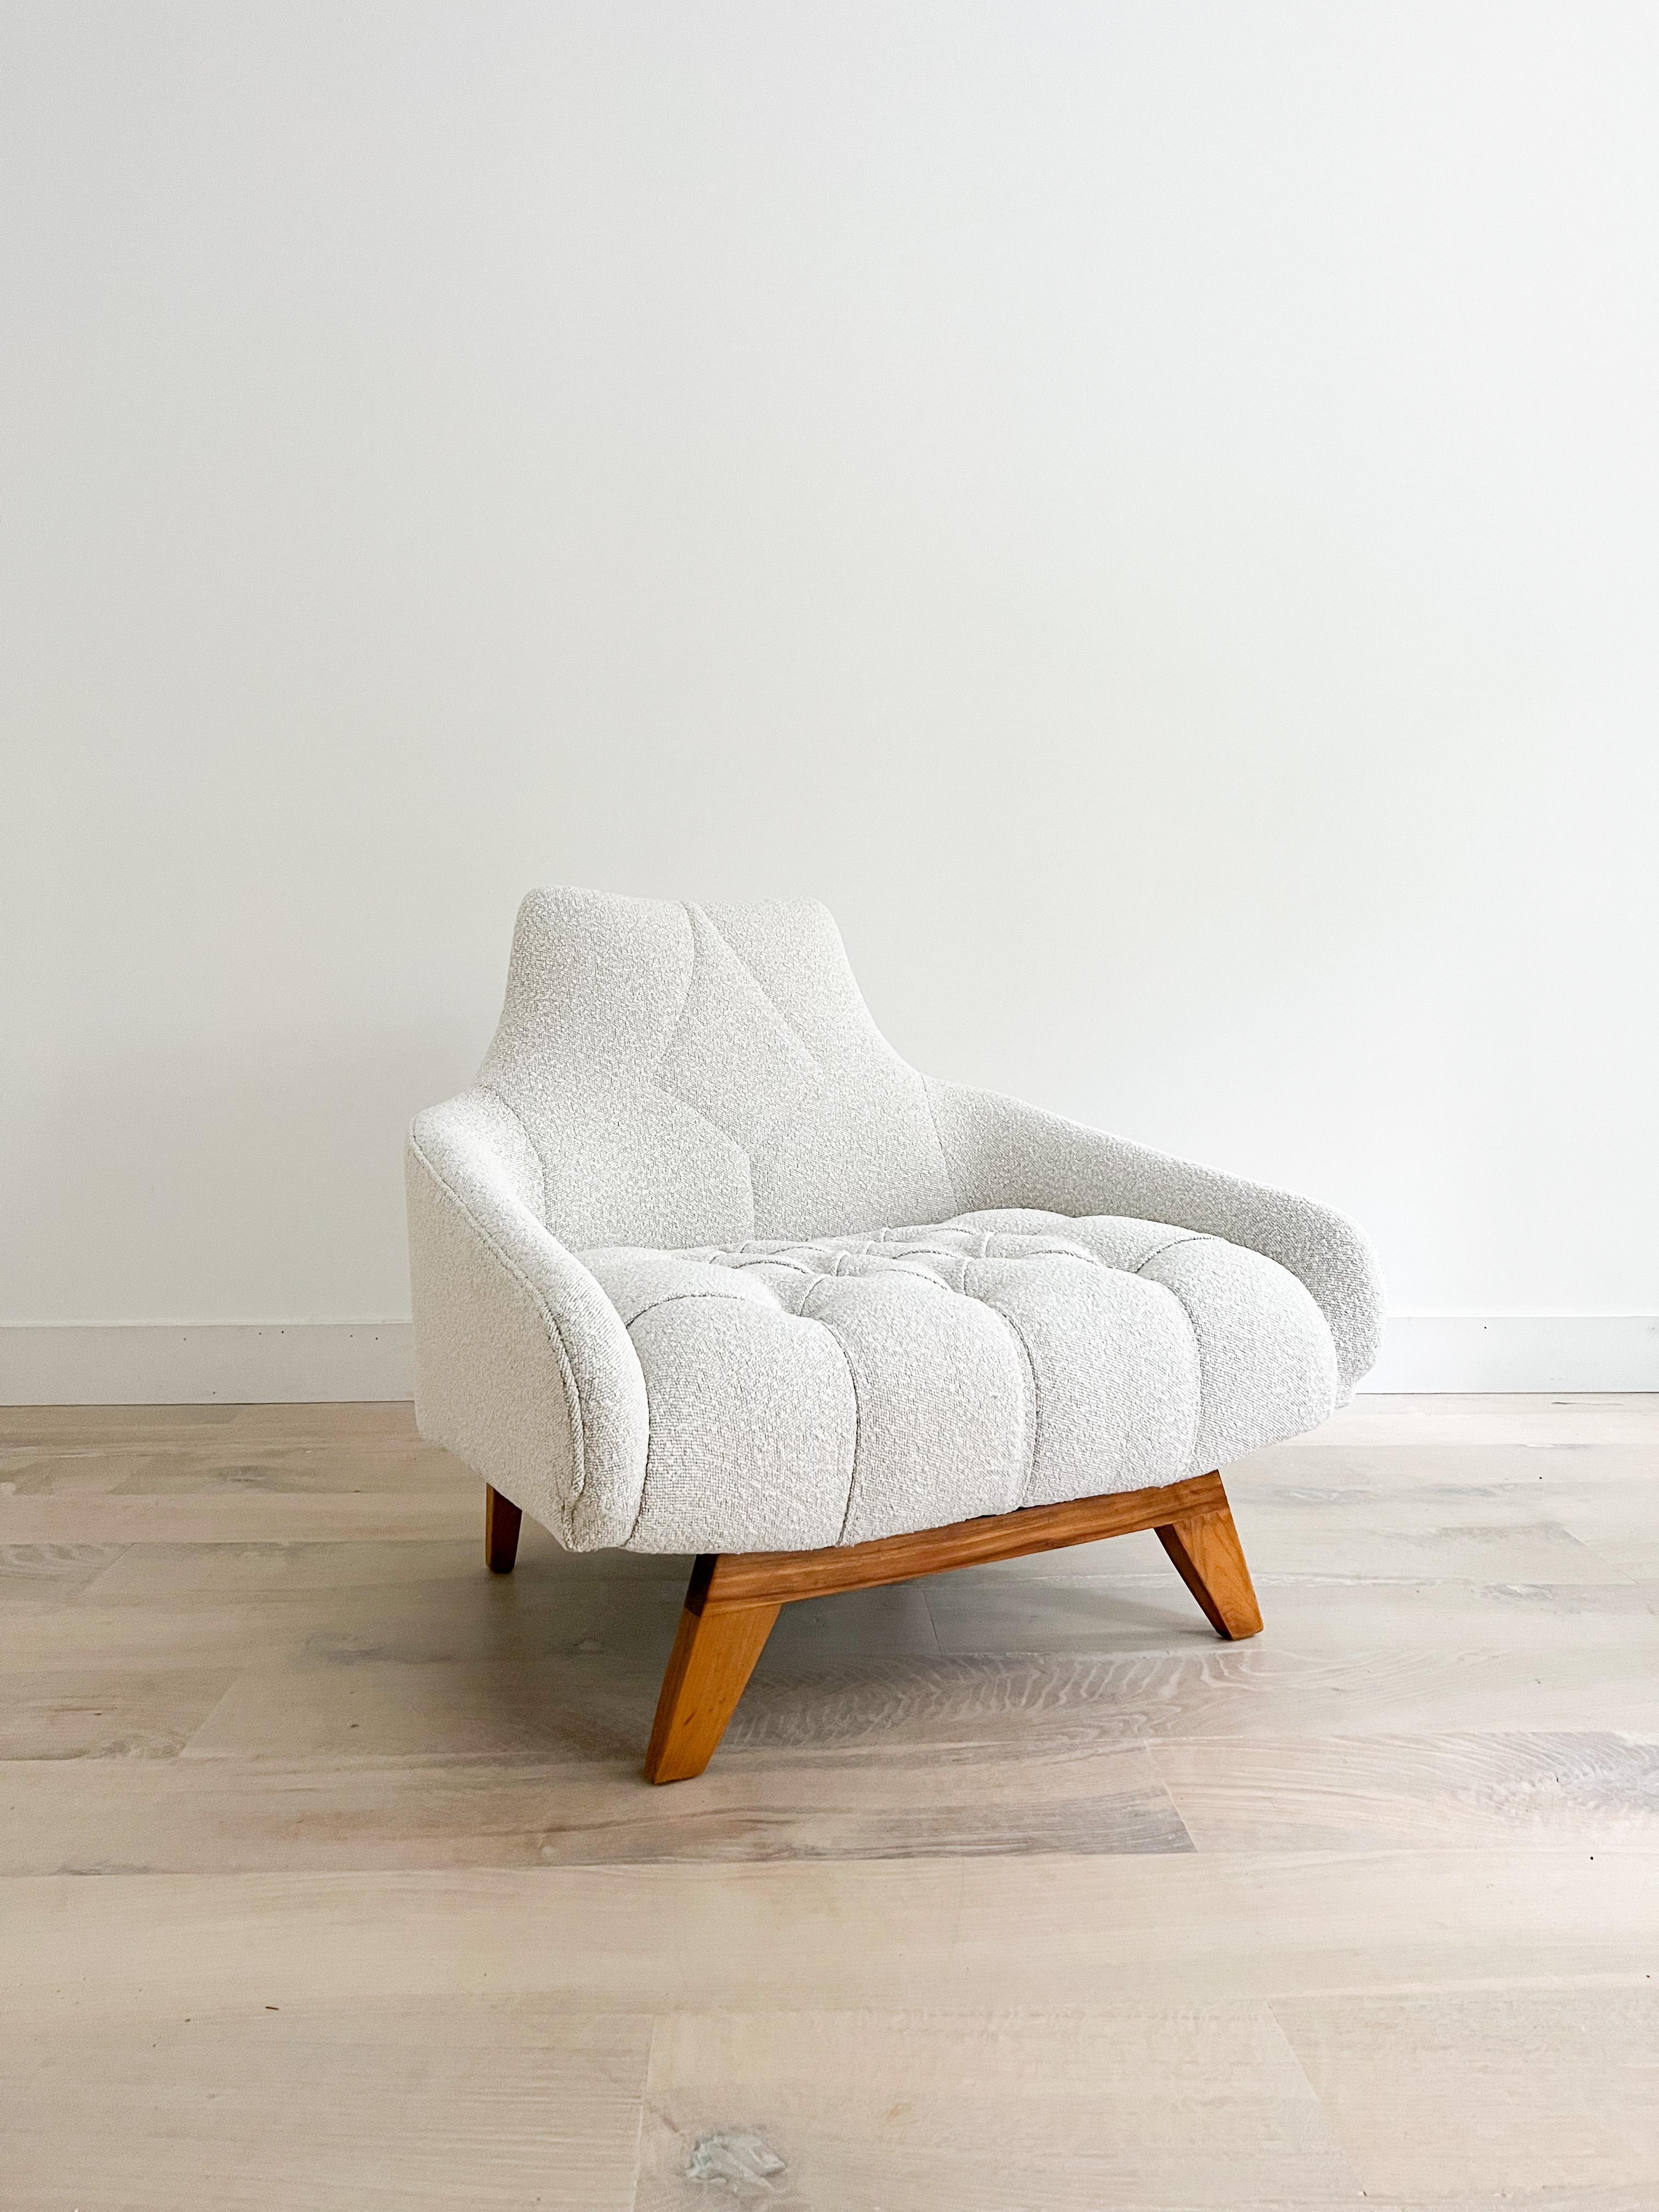 Stunning Mid-Century Modern lounge chair and ottoman - Attributed to Alan White. New off white boucle tufted upholstery. Diamond tufted back! 

Chair
37.25”x31” 16”SH 33.25”H
Ottoman
36.5”x22.5” 19.25”H